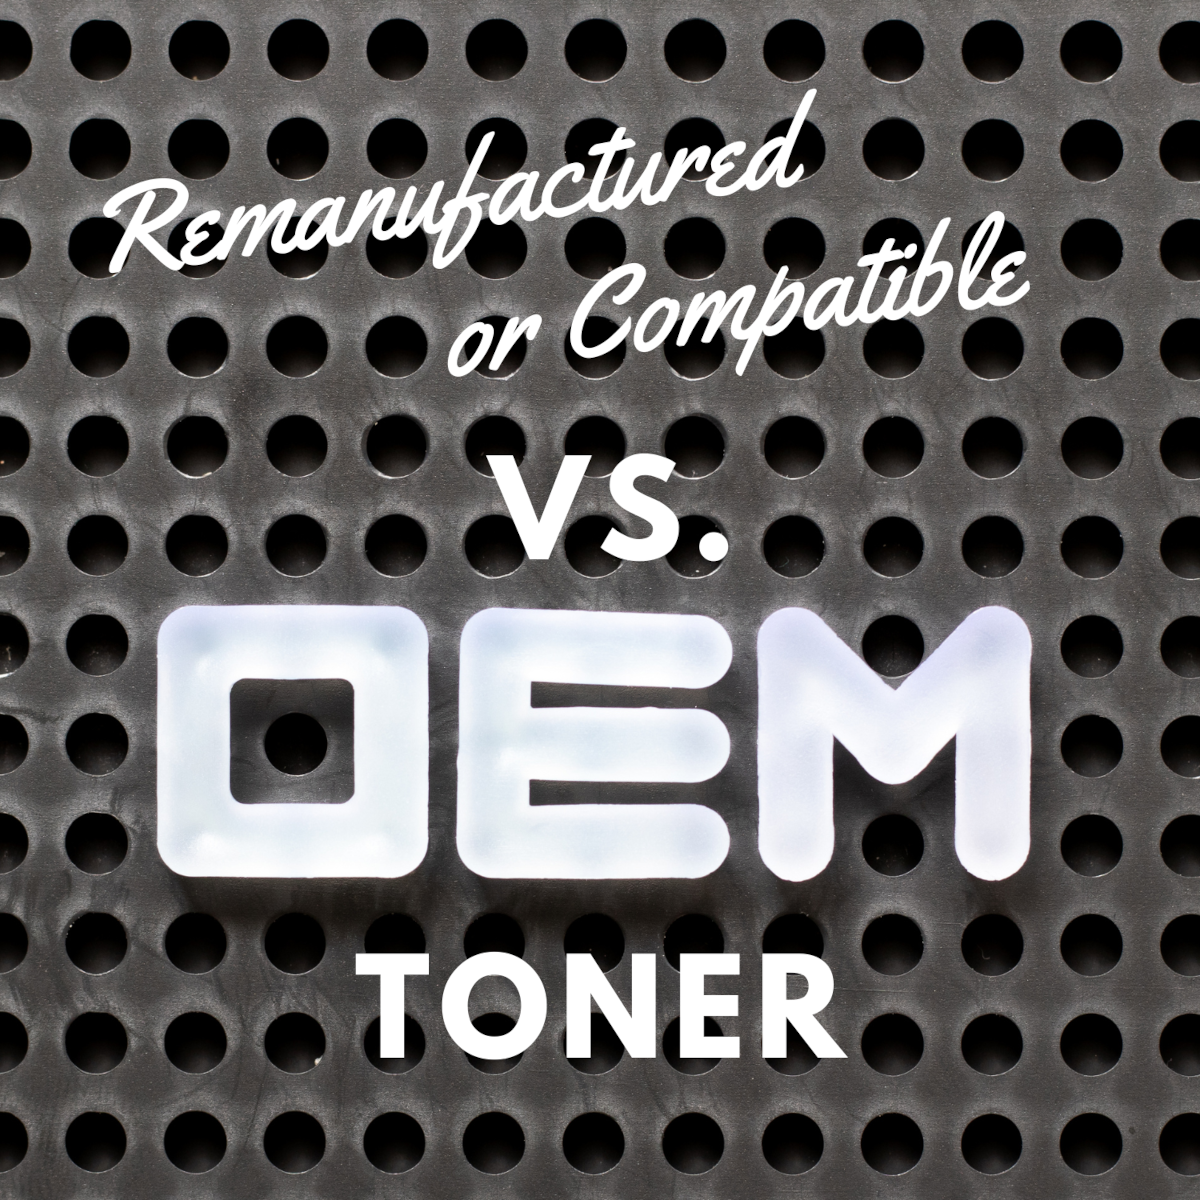 Text saying 'Remanufacture or Compatible Vs. OEM Toner' over a steel grate.